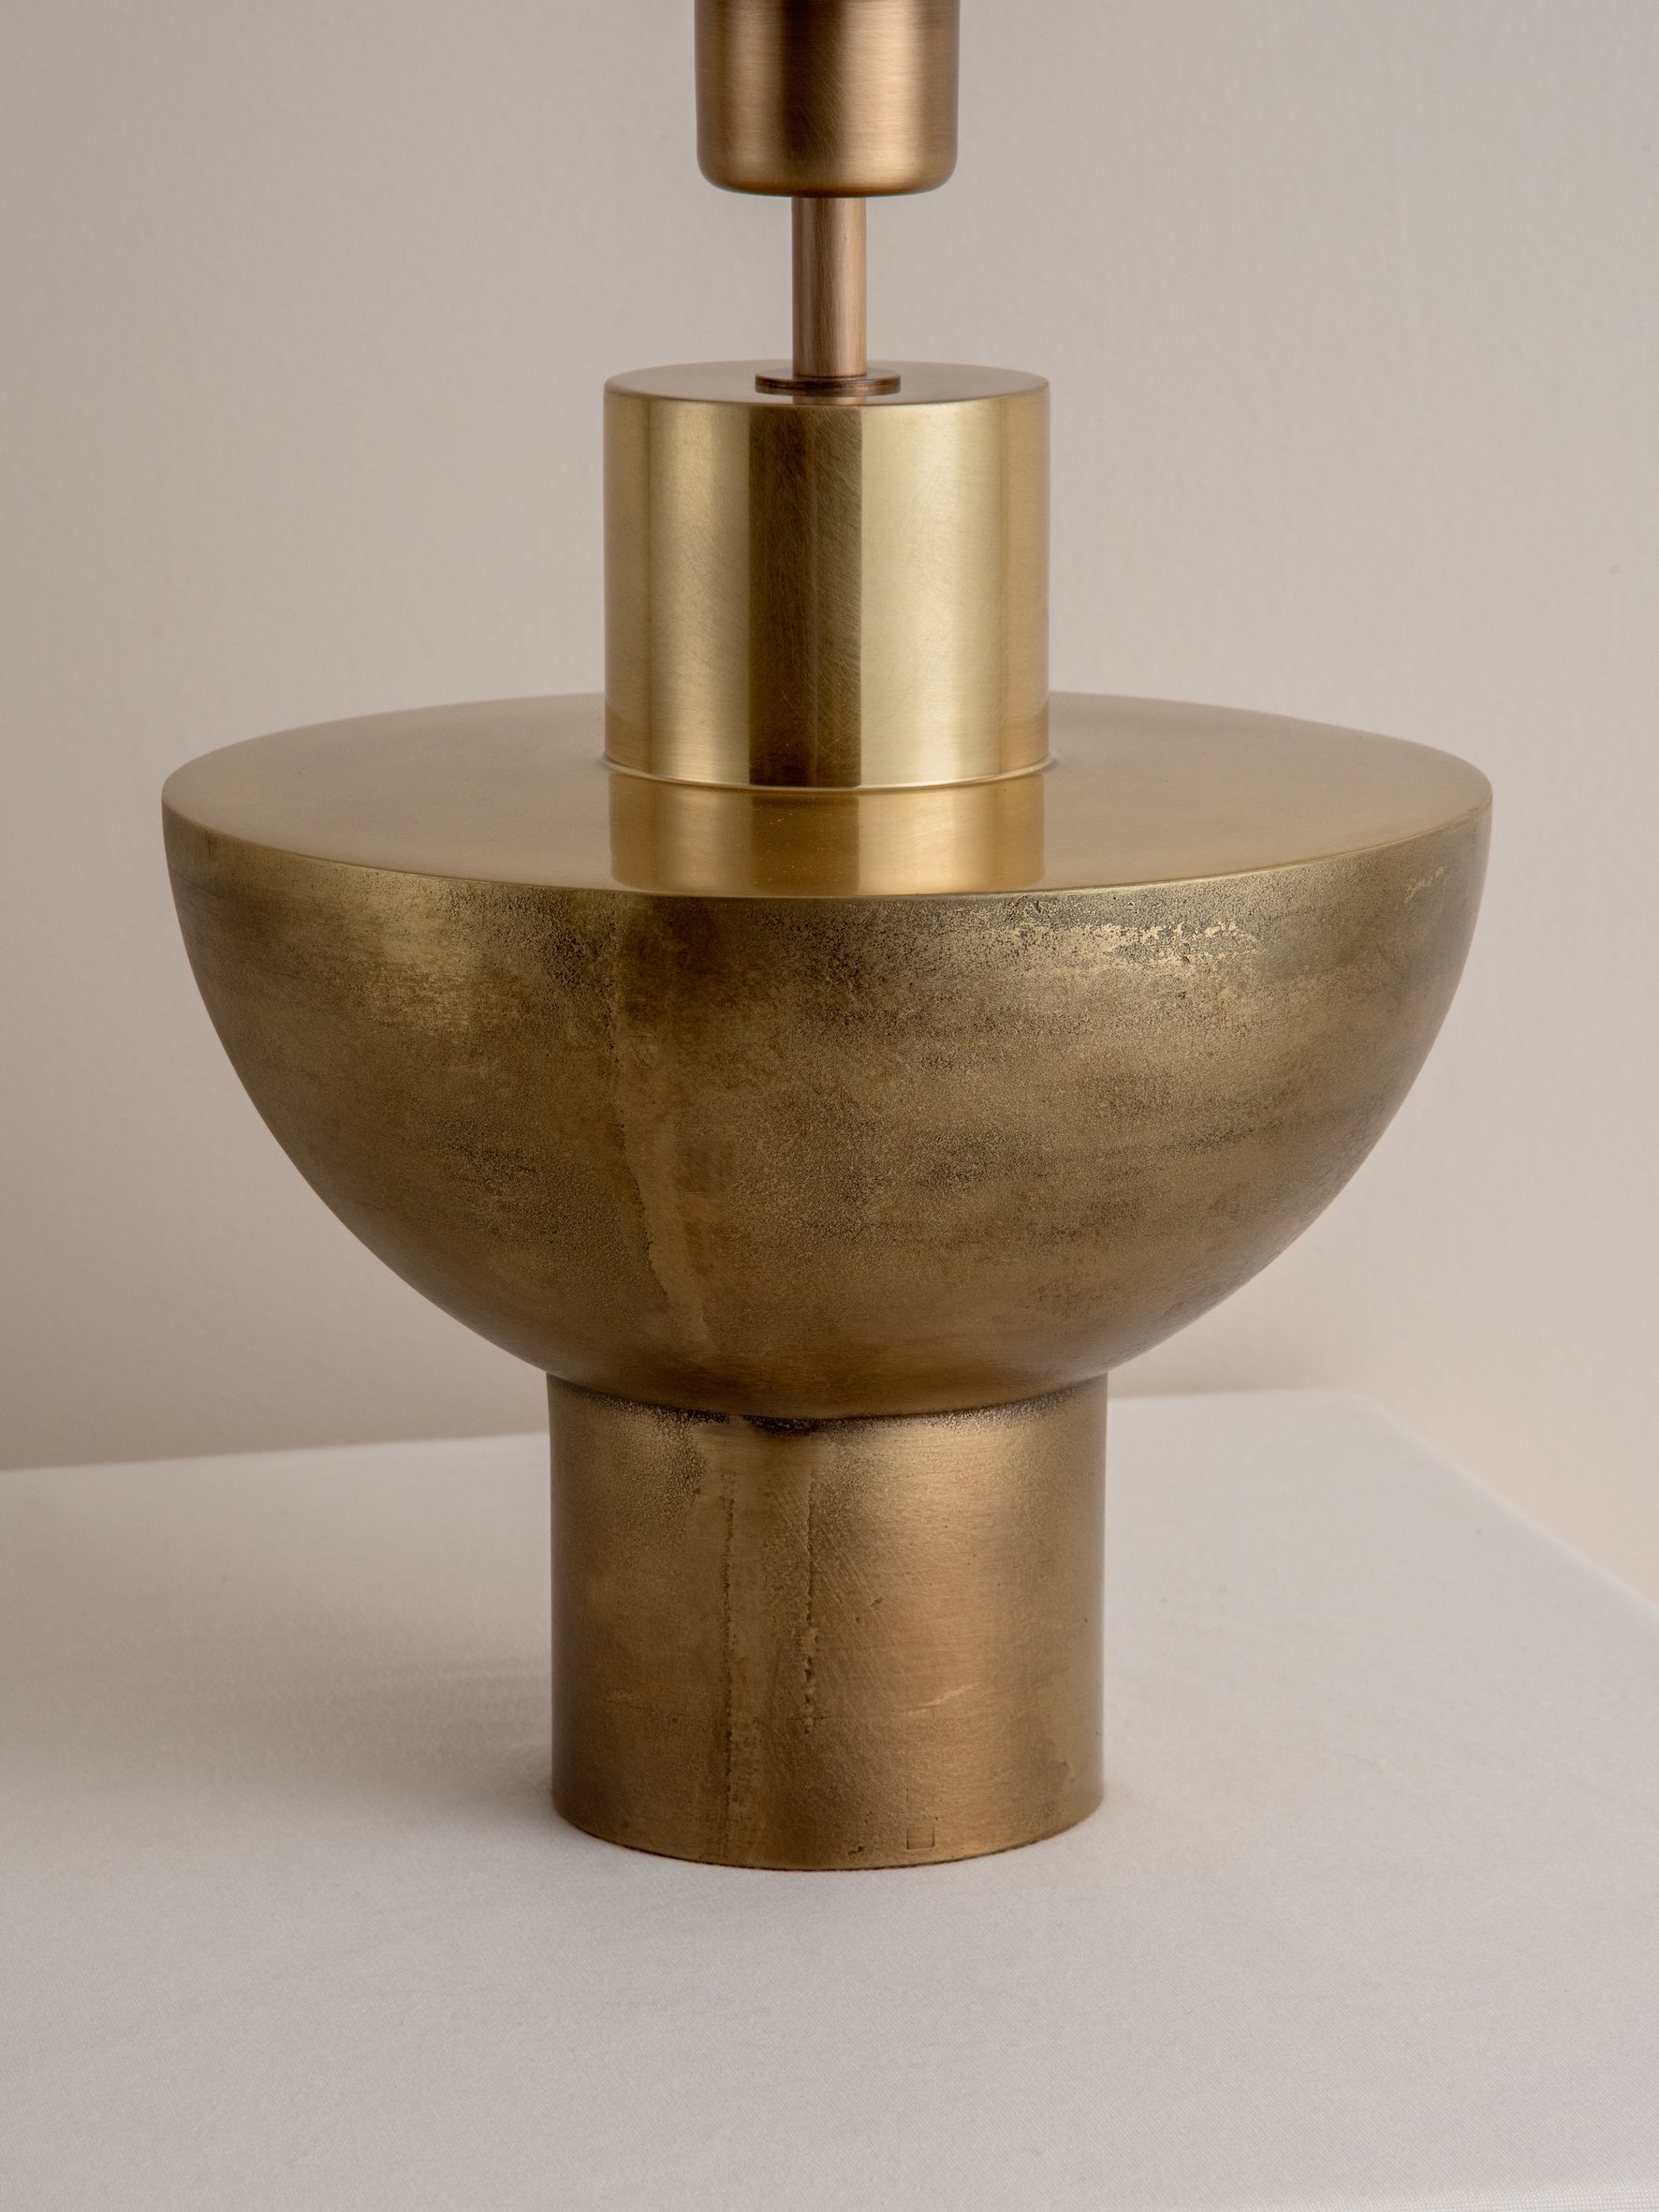 Editions brass lamp with + bronze shade | Table Lamp | Lights & Lamps | UK | Modern Affordable Designer Lighting